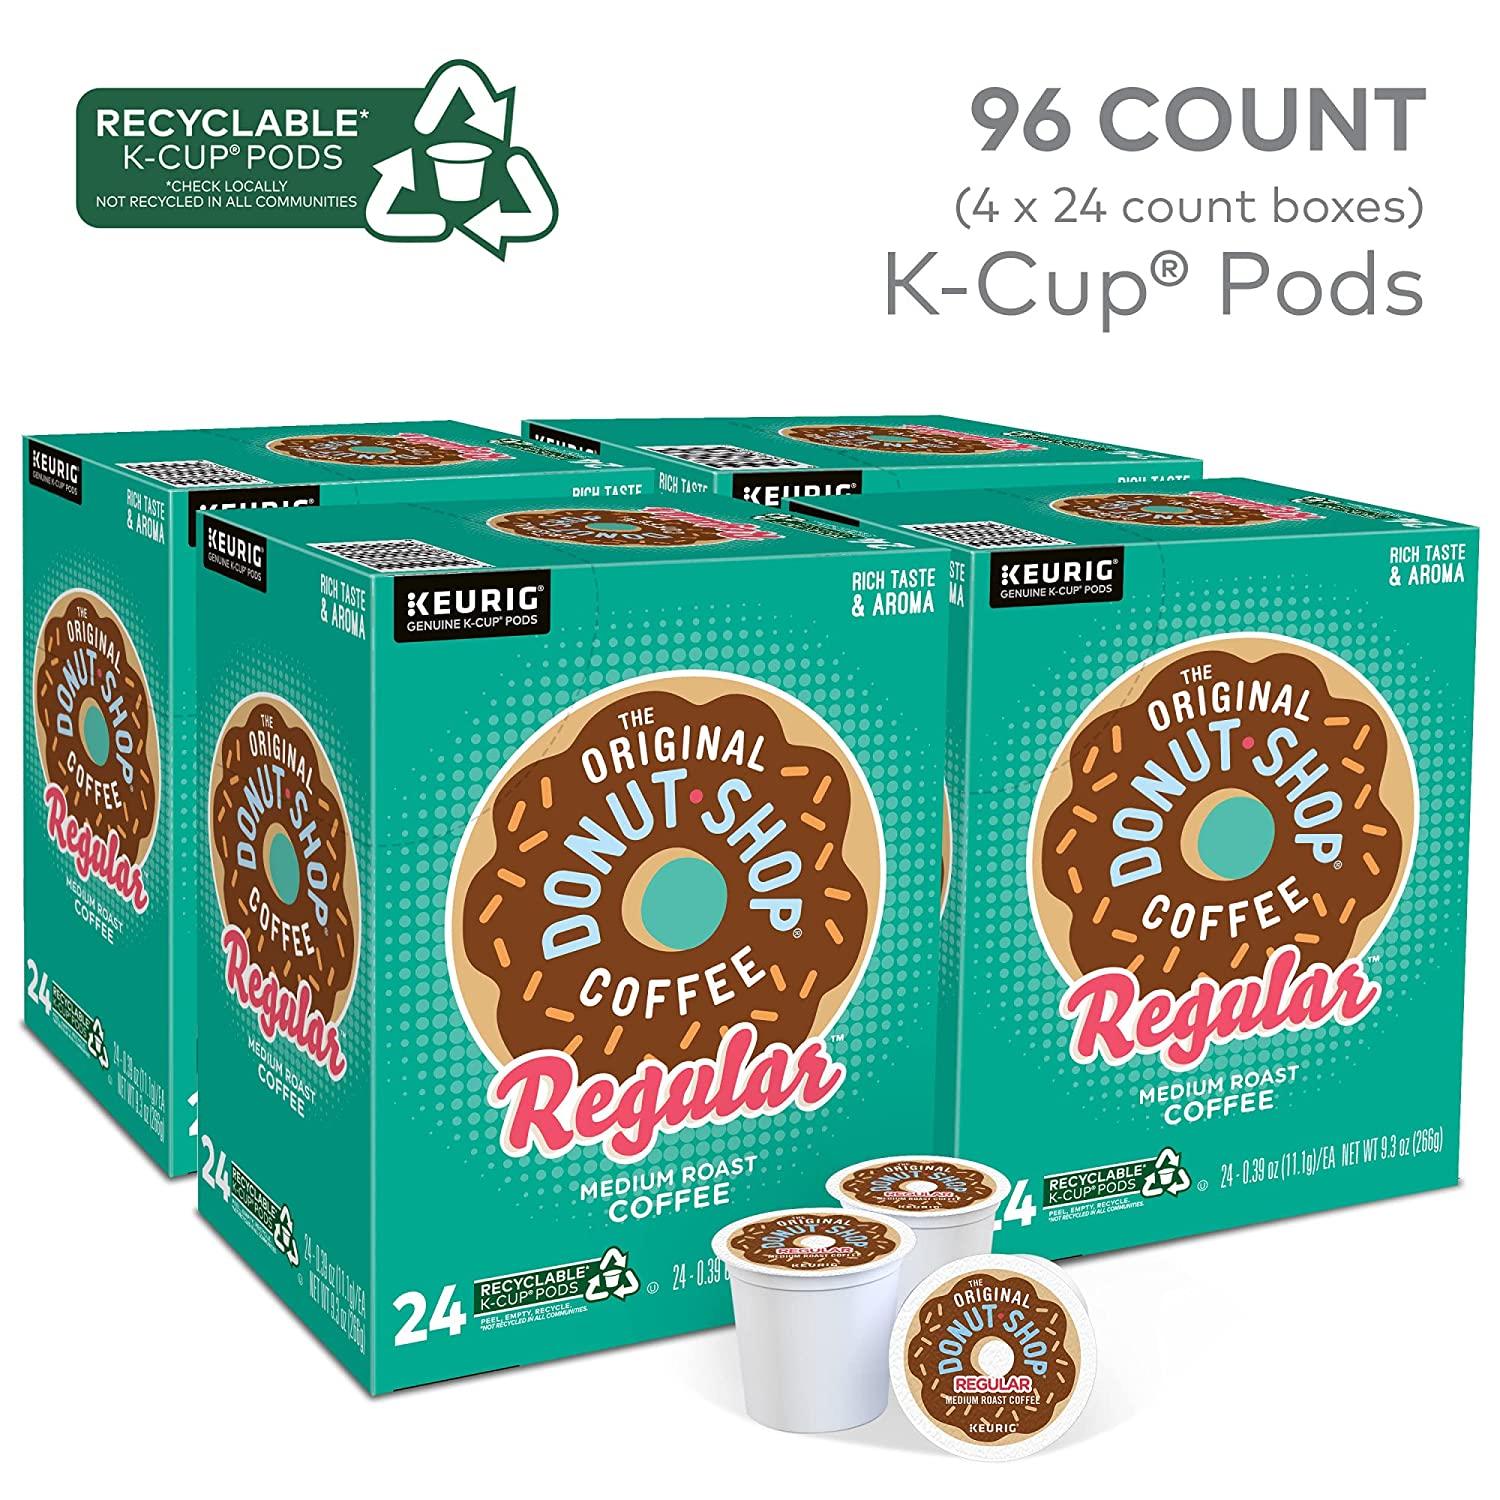 96-Count The Original Donut Shop Coffee K-Cups for $31.81 Shipped